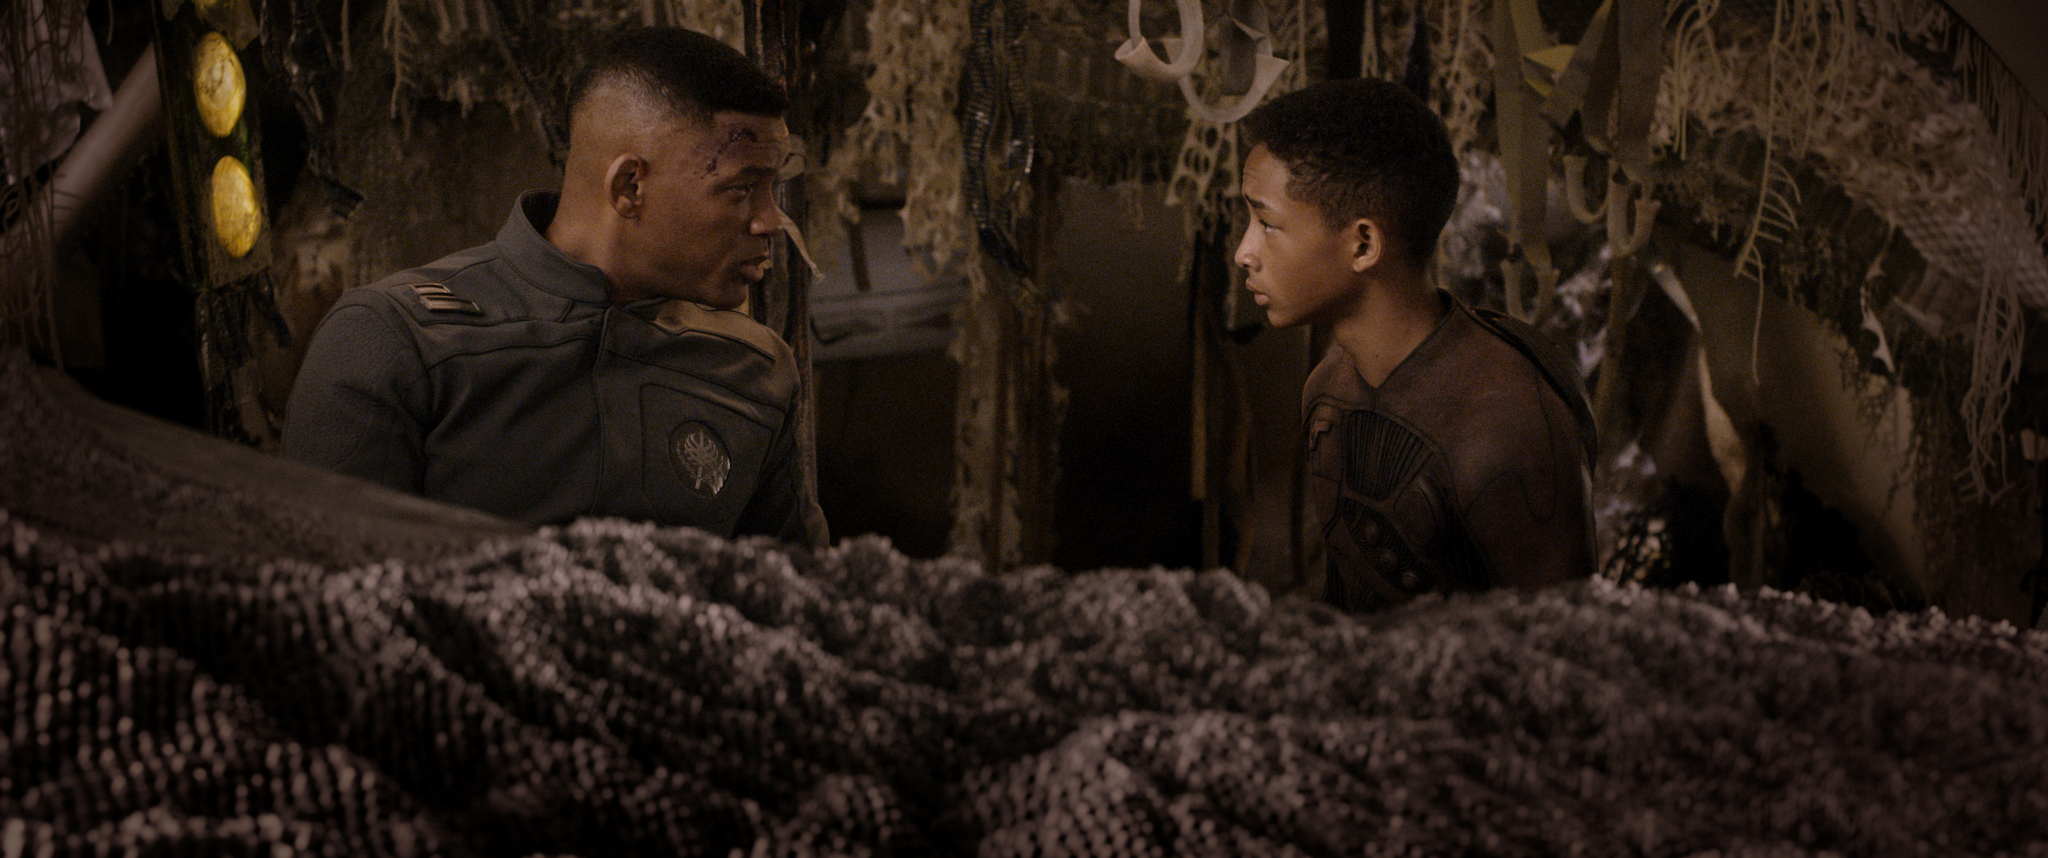 Will-Smith-and-Jaden-Smith-in-After-Earth